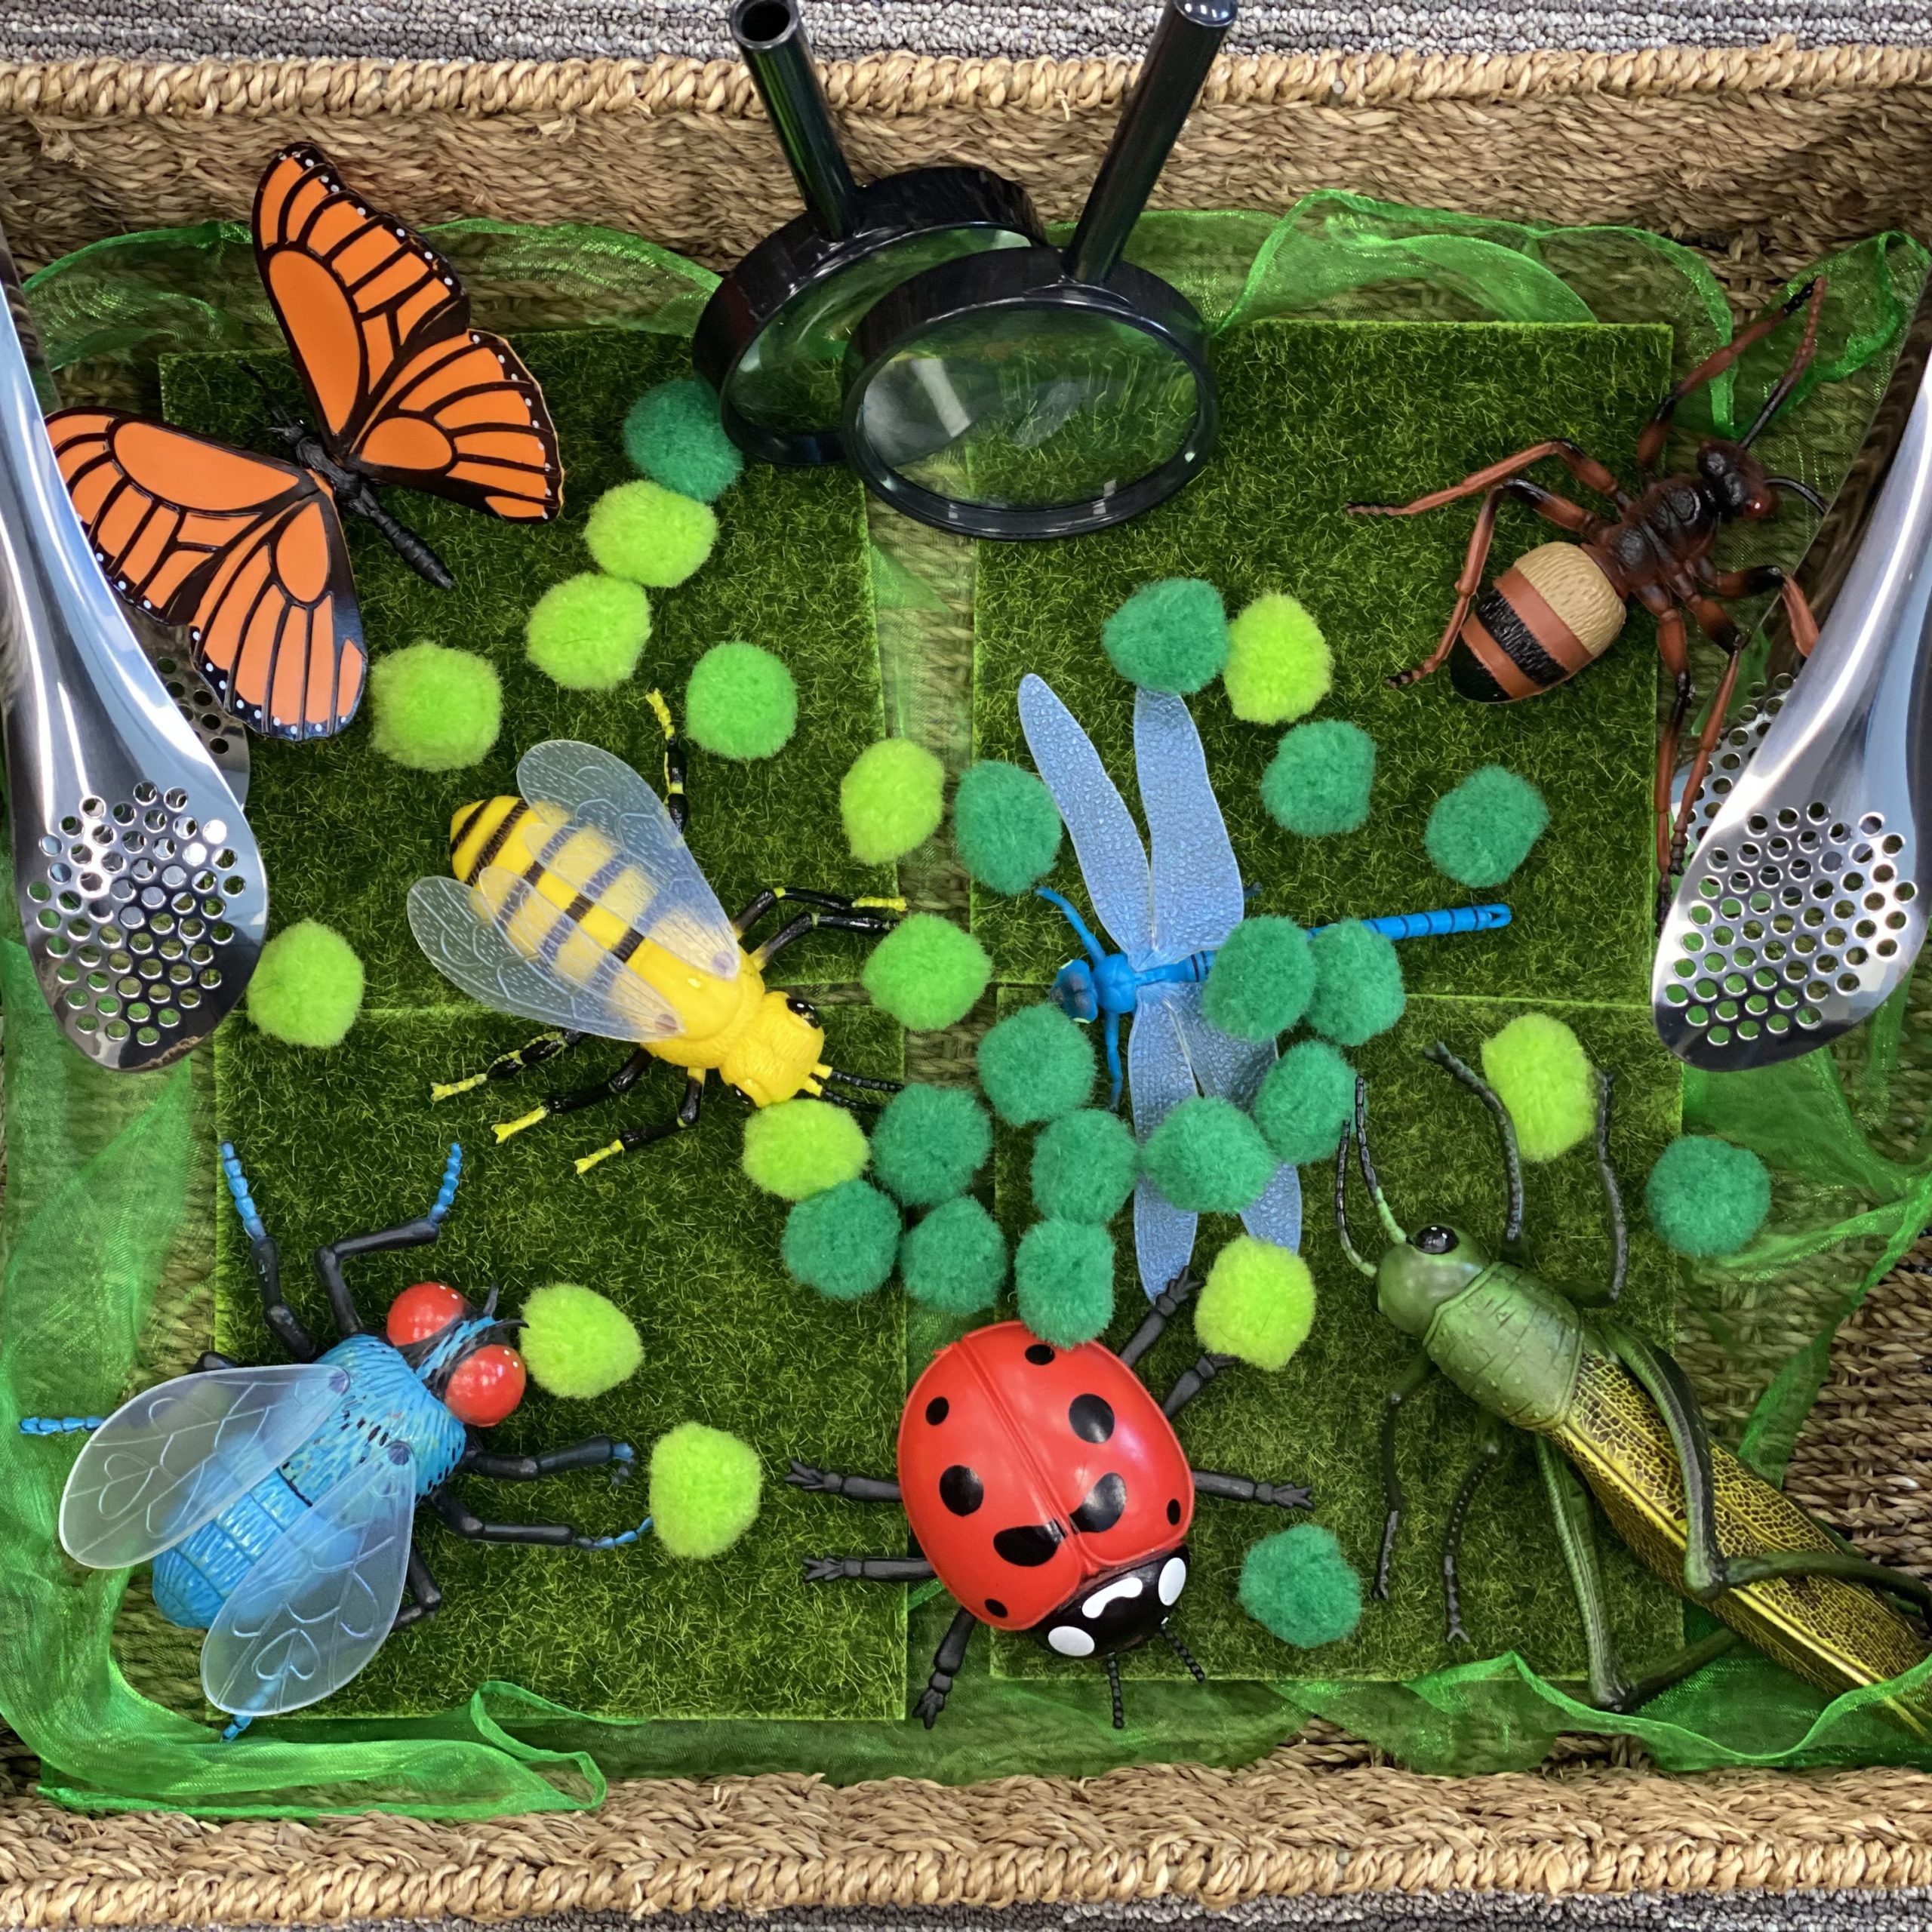 Infants & Toddlers Explore Insects through Sensory Play